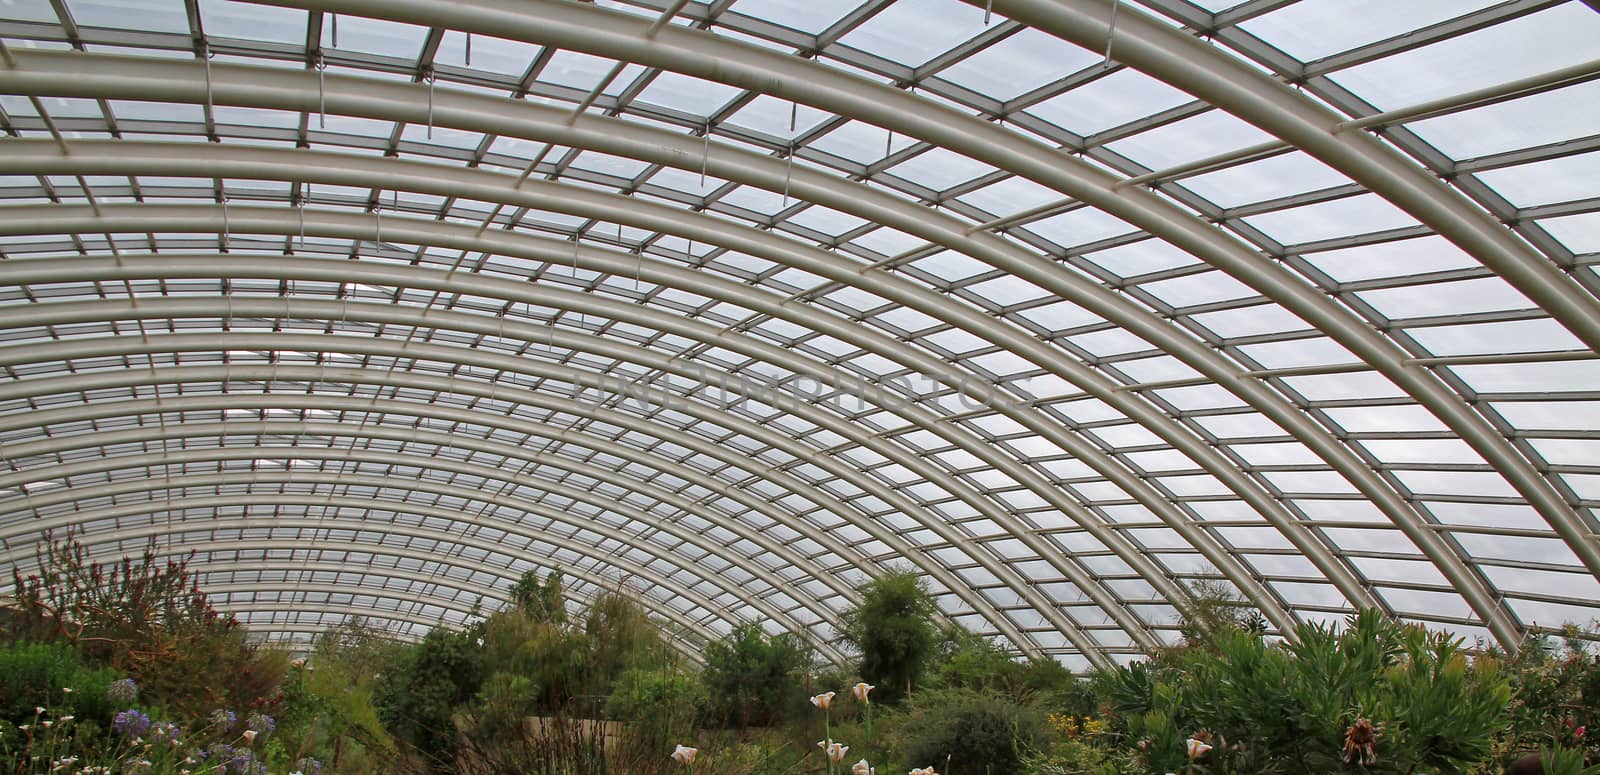 Giant Greenhouse Roof by gary_parker